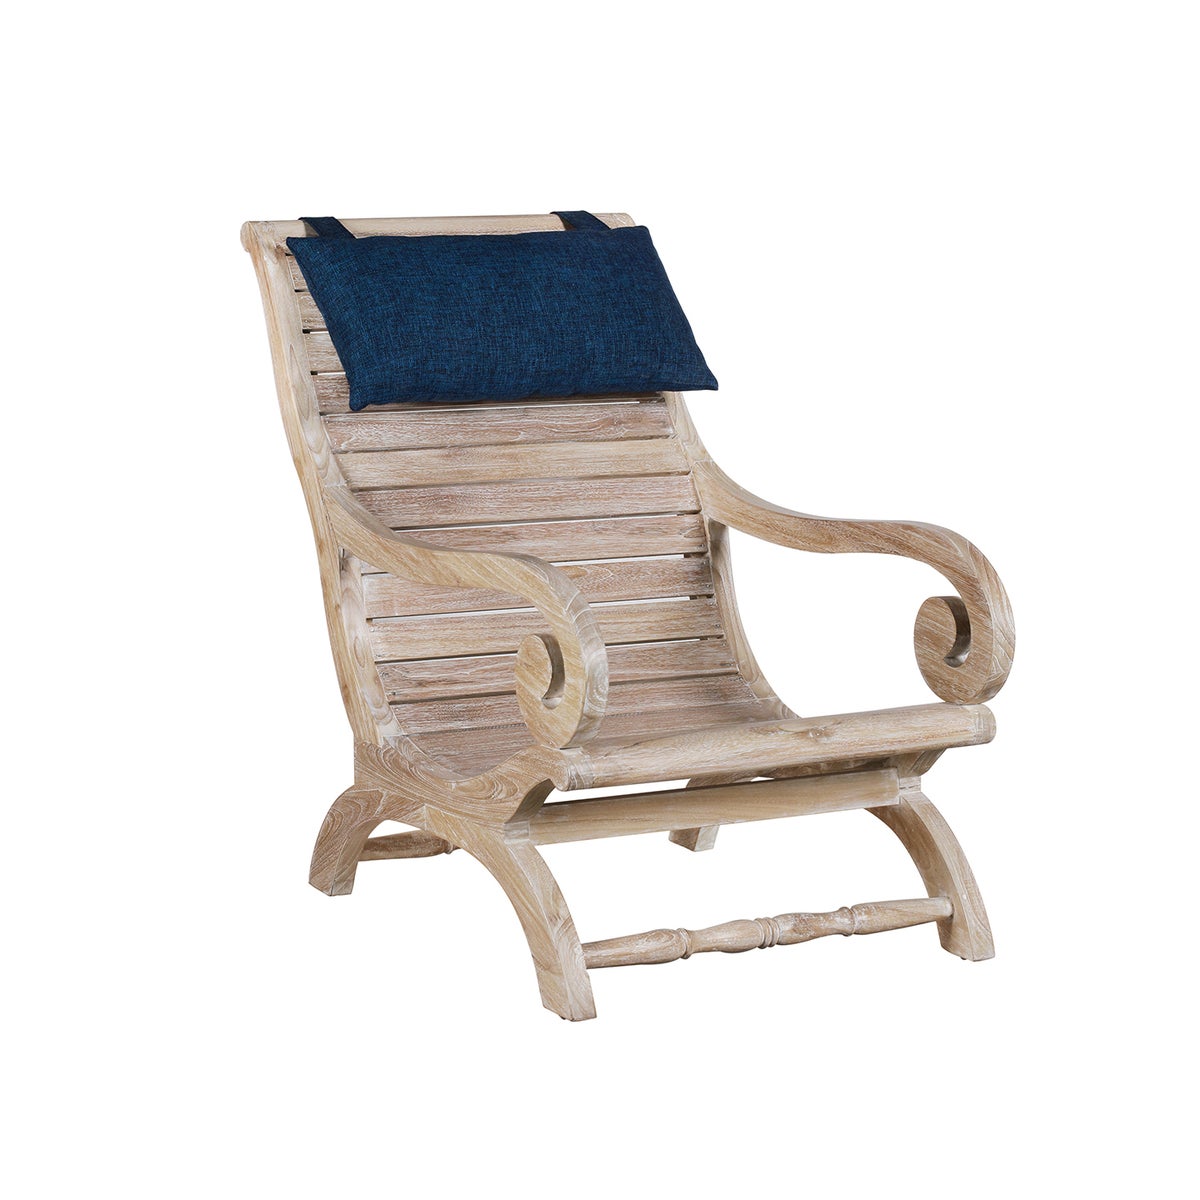 Teak Slatted Lazy Chair with Neck Rest